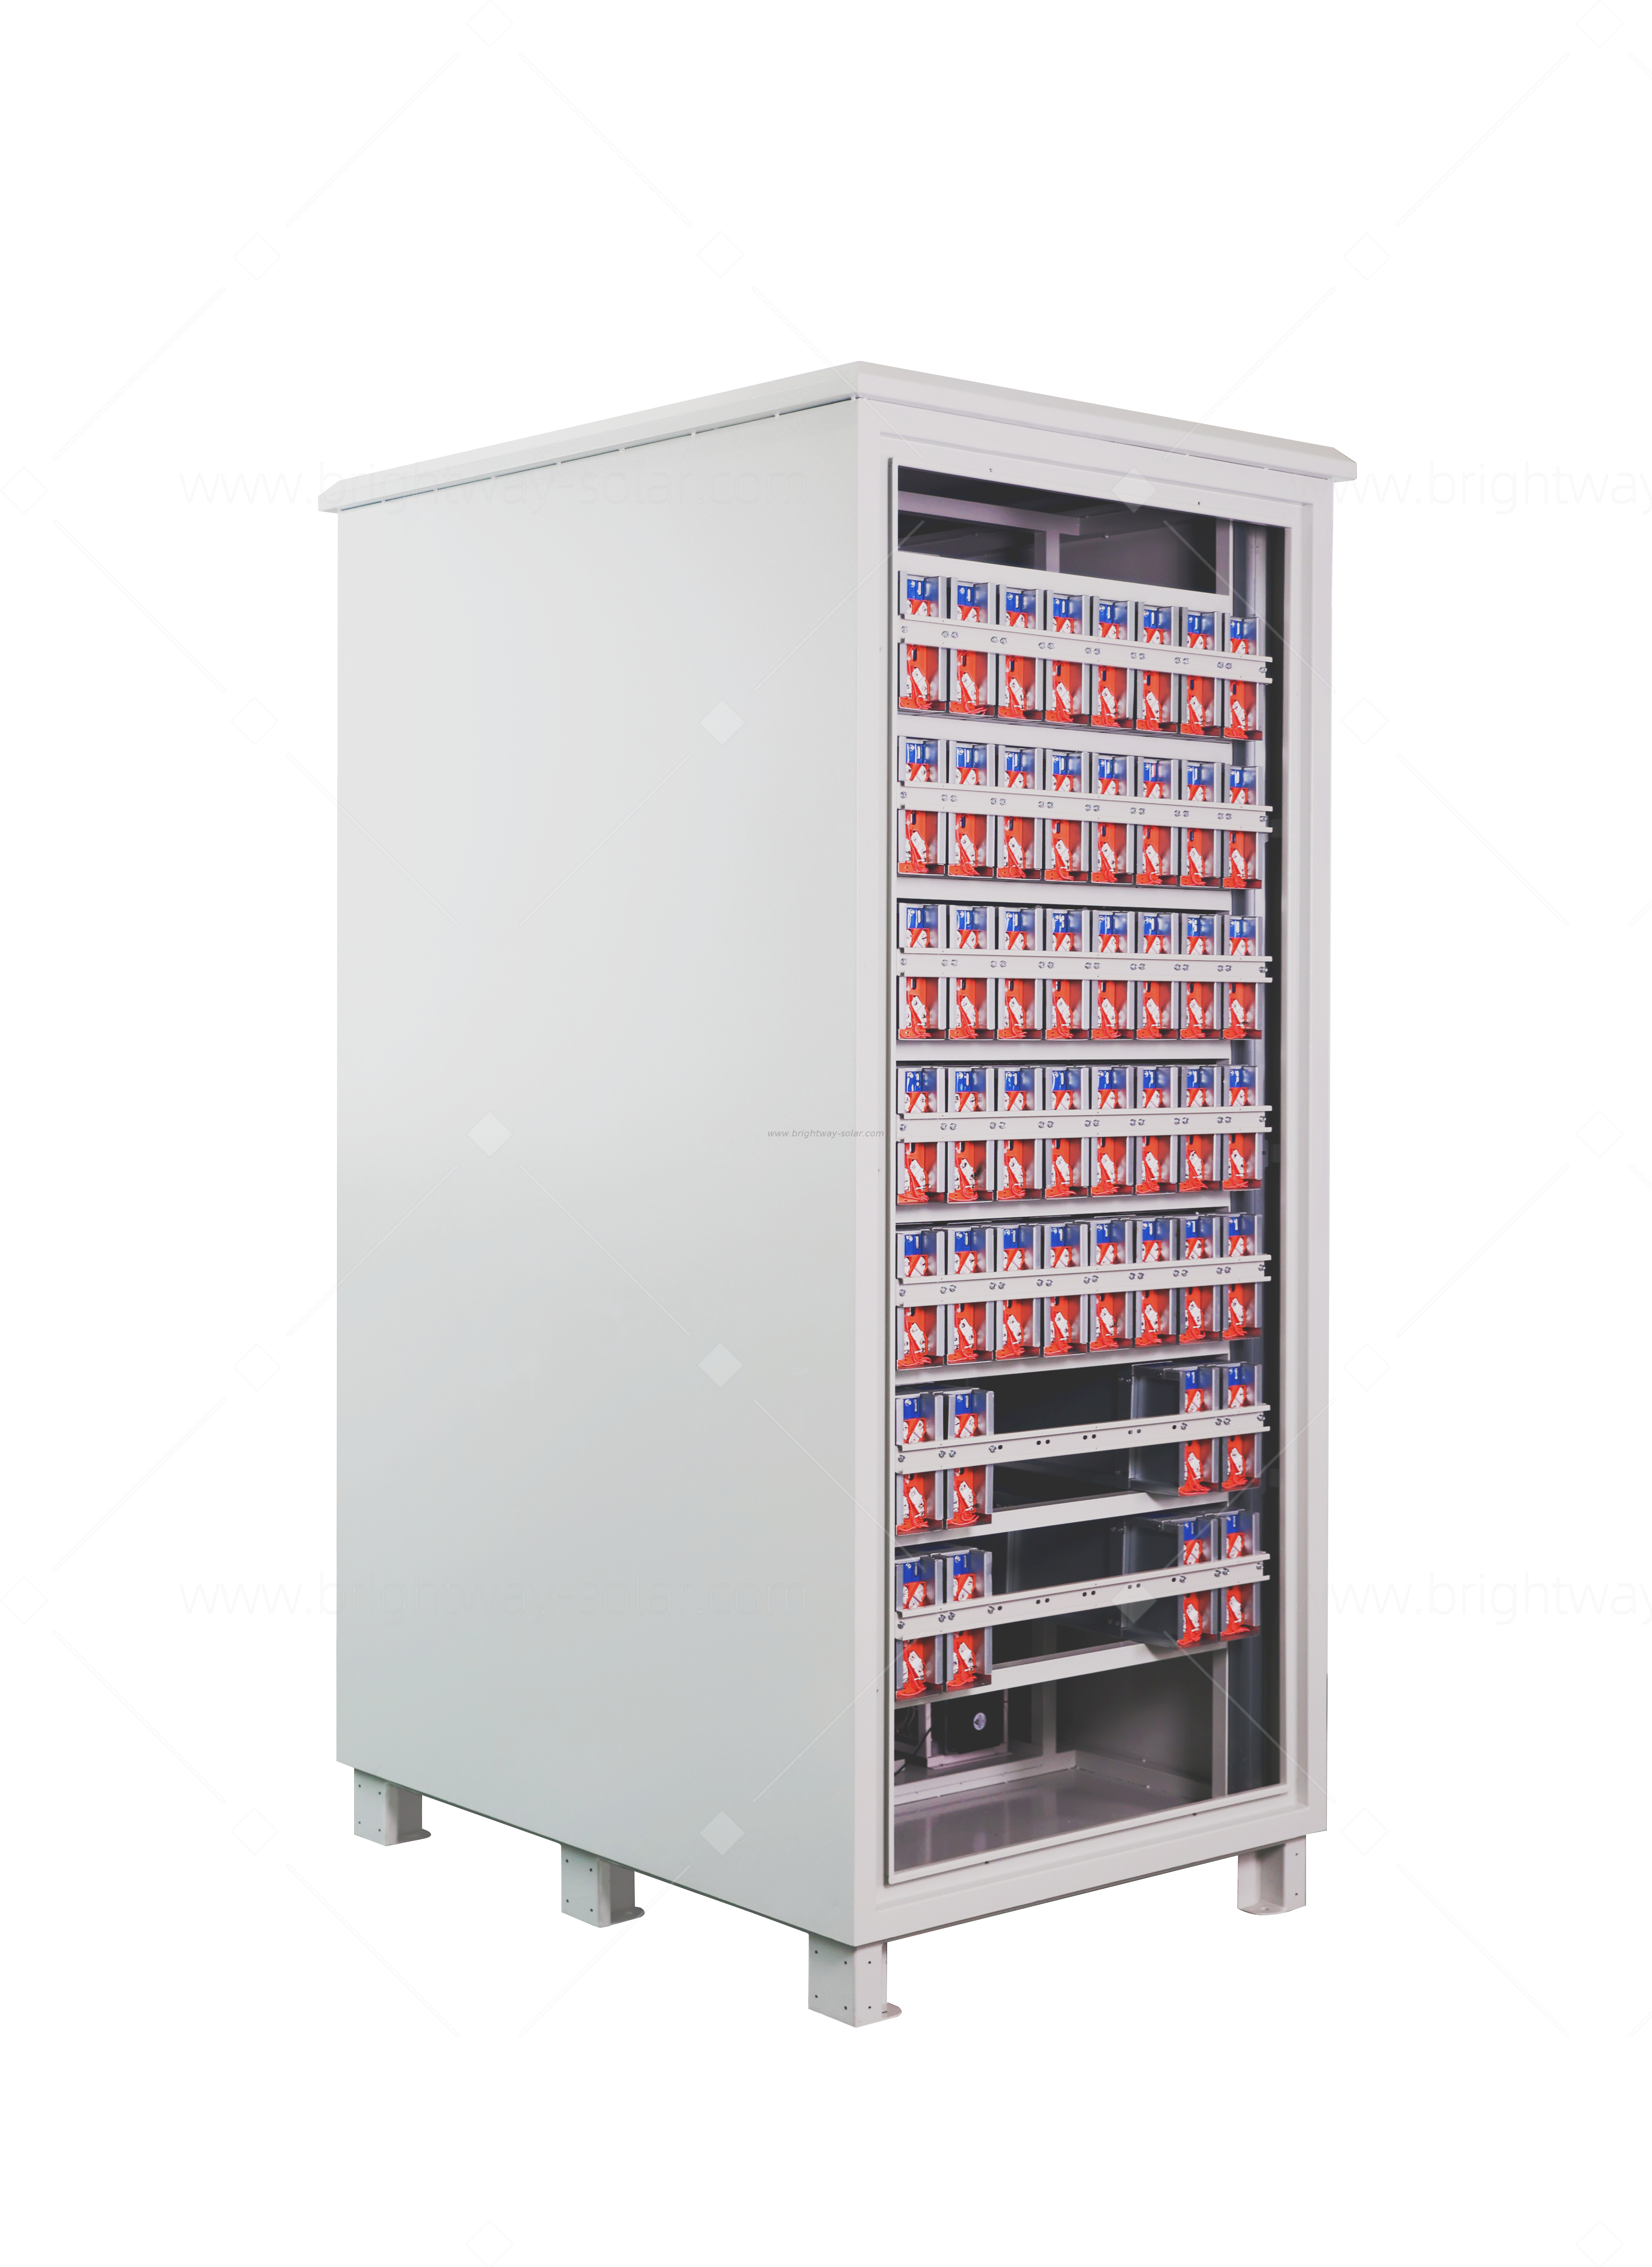 Brightway Solar Outdoor IP54 Rated LFP Battery Air Cooled Energy Storage Cabinet 50kW 200kWh Solution for Outdoor Use